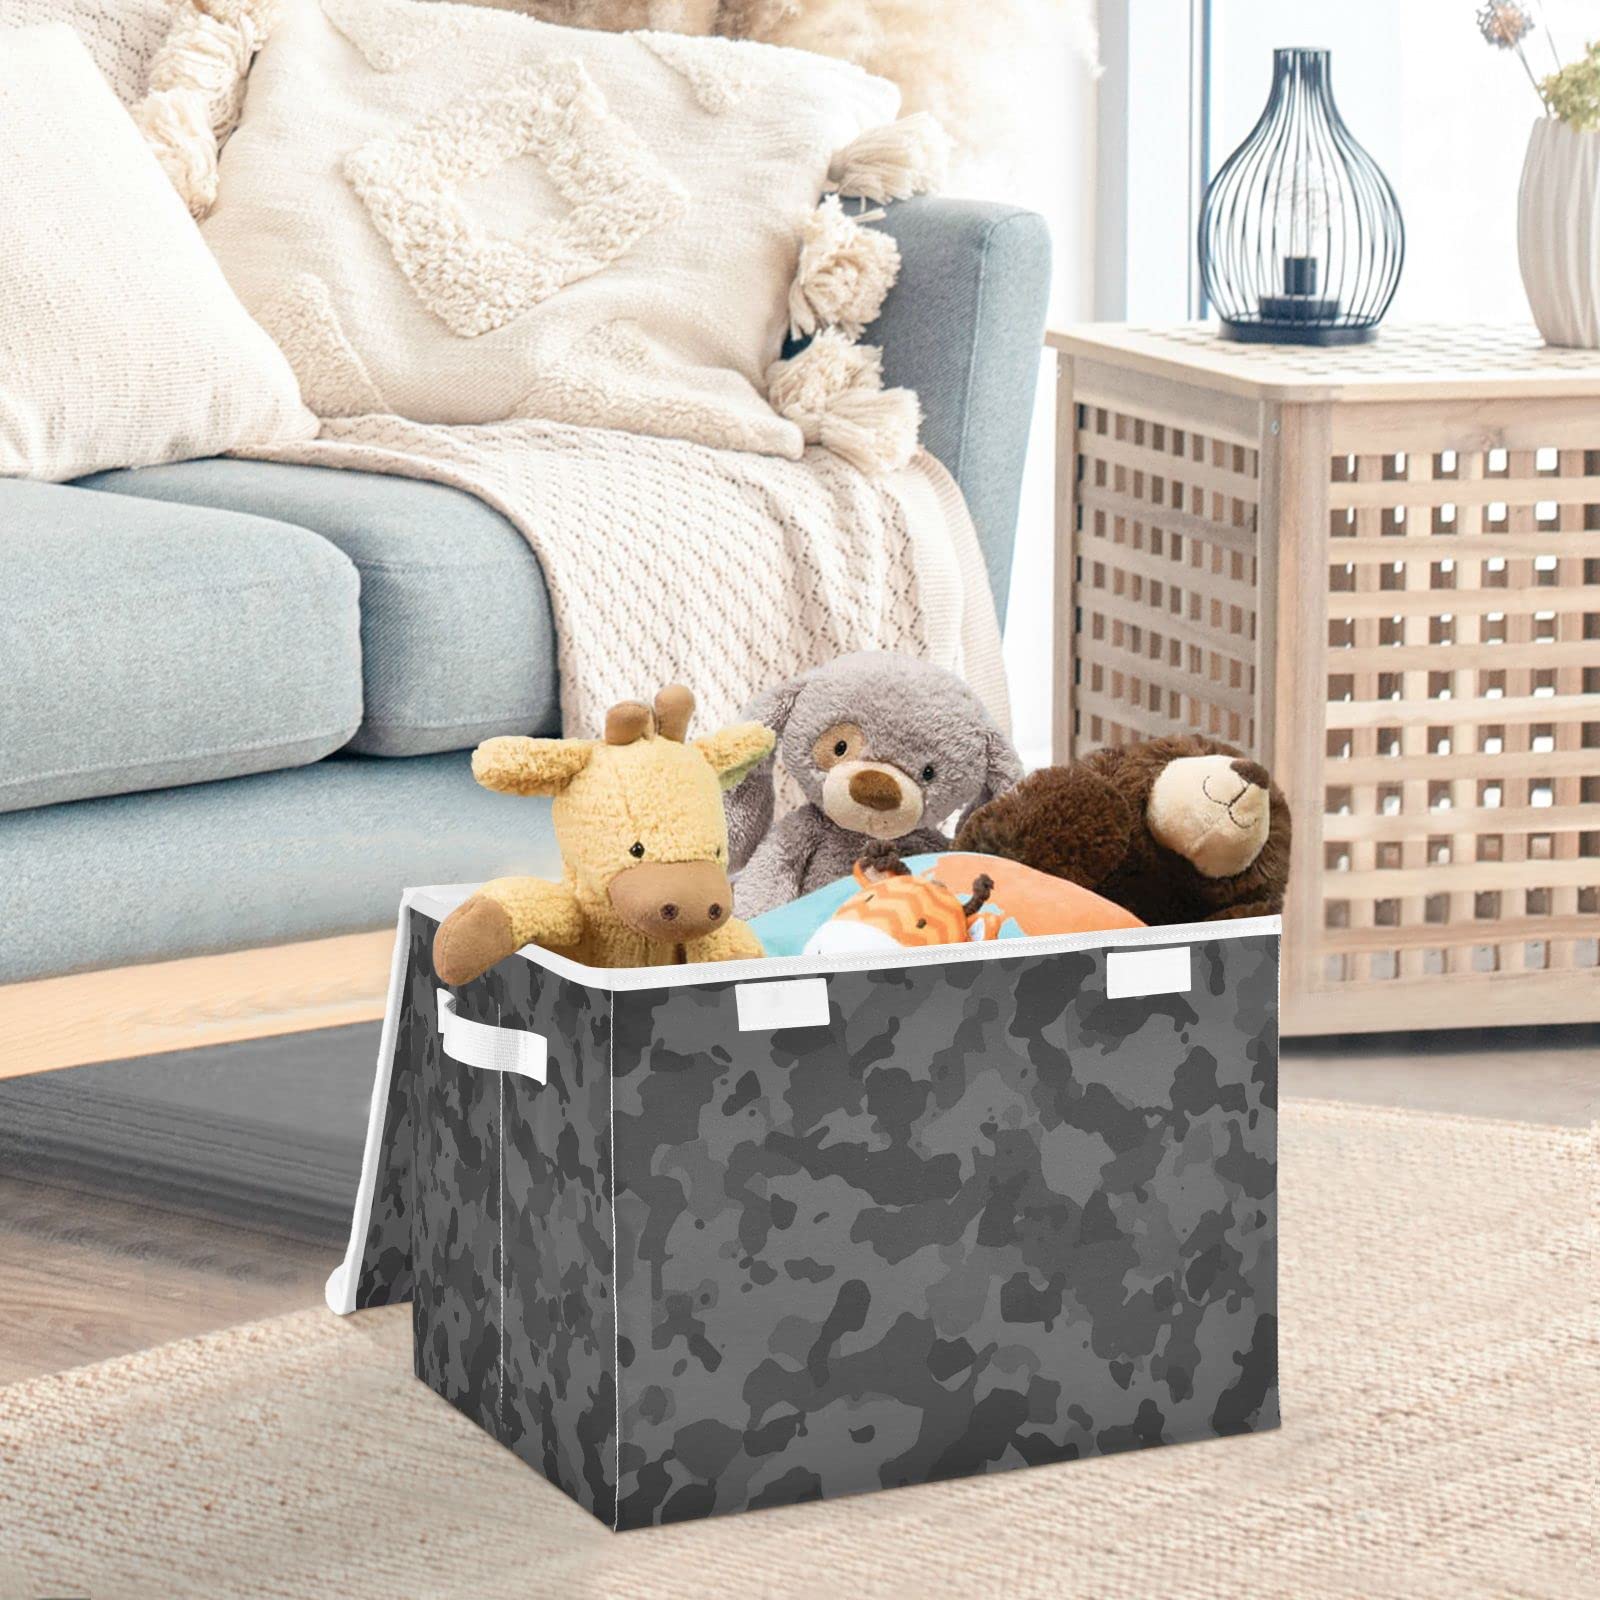 Kigai Storage Basket Black Camo Storage Boxes with Lids and Handle, Large Storage Cube Bin Collapsible for Shelves Closet Bedroom Living Room, 16.5x12.6x11.8 In